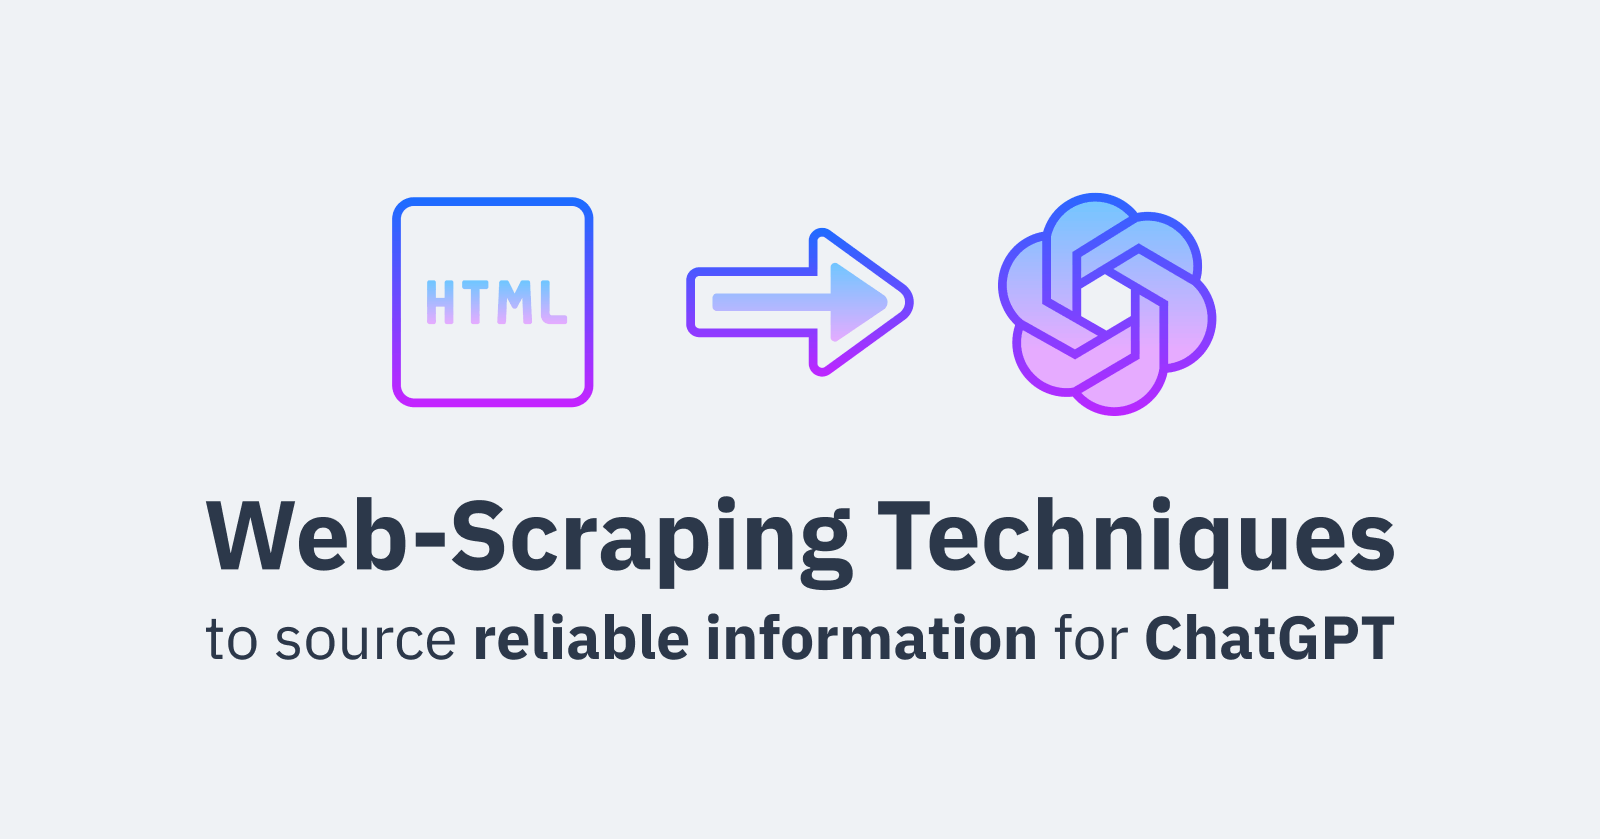 Web-Scraping Techniques to Source Reliable Information for ChatGPT